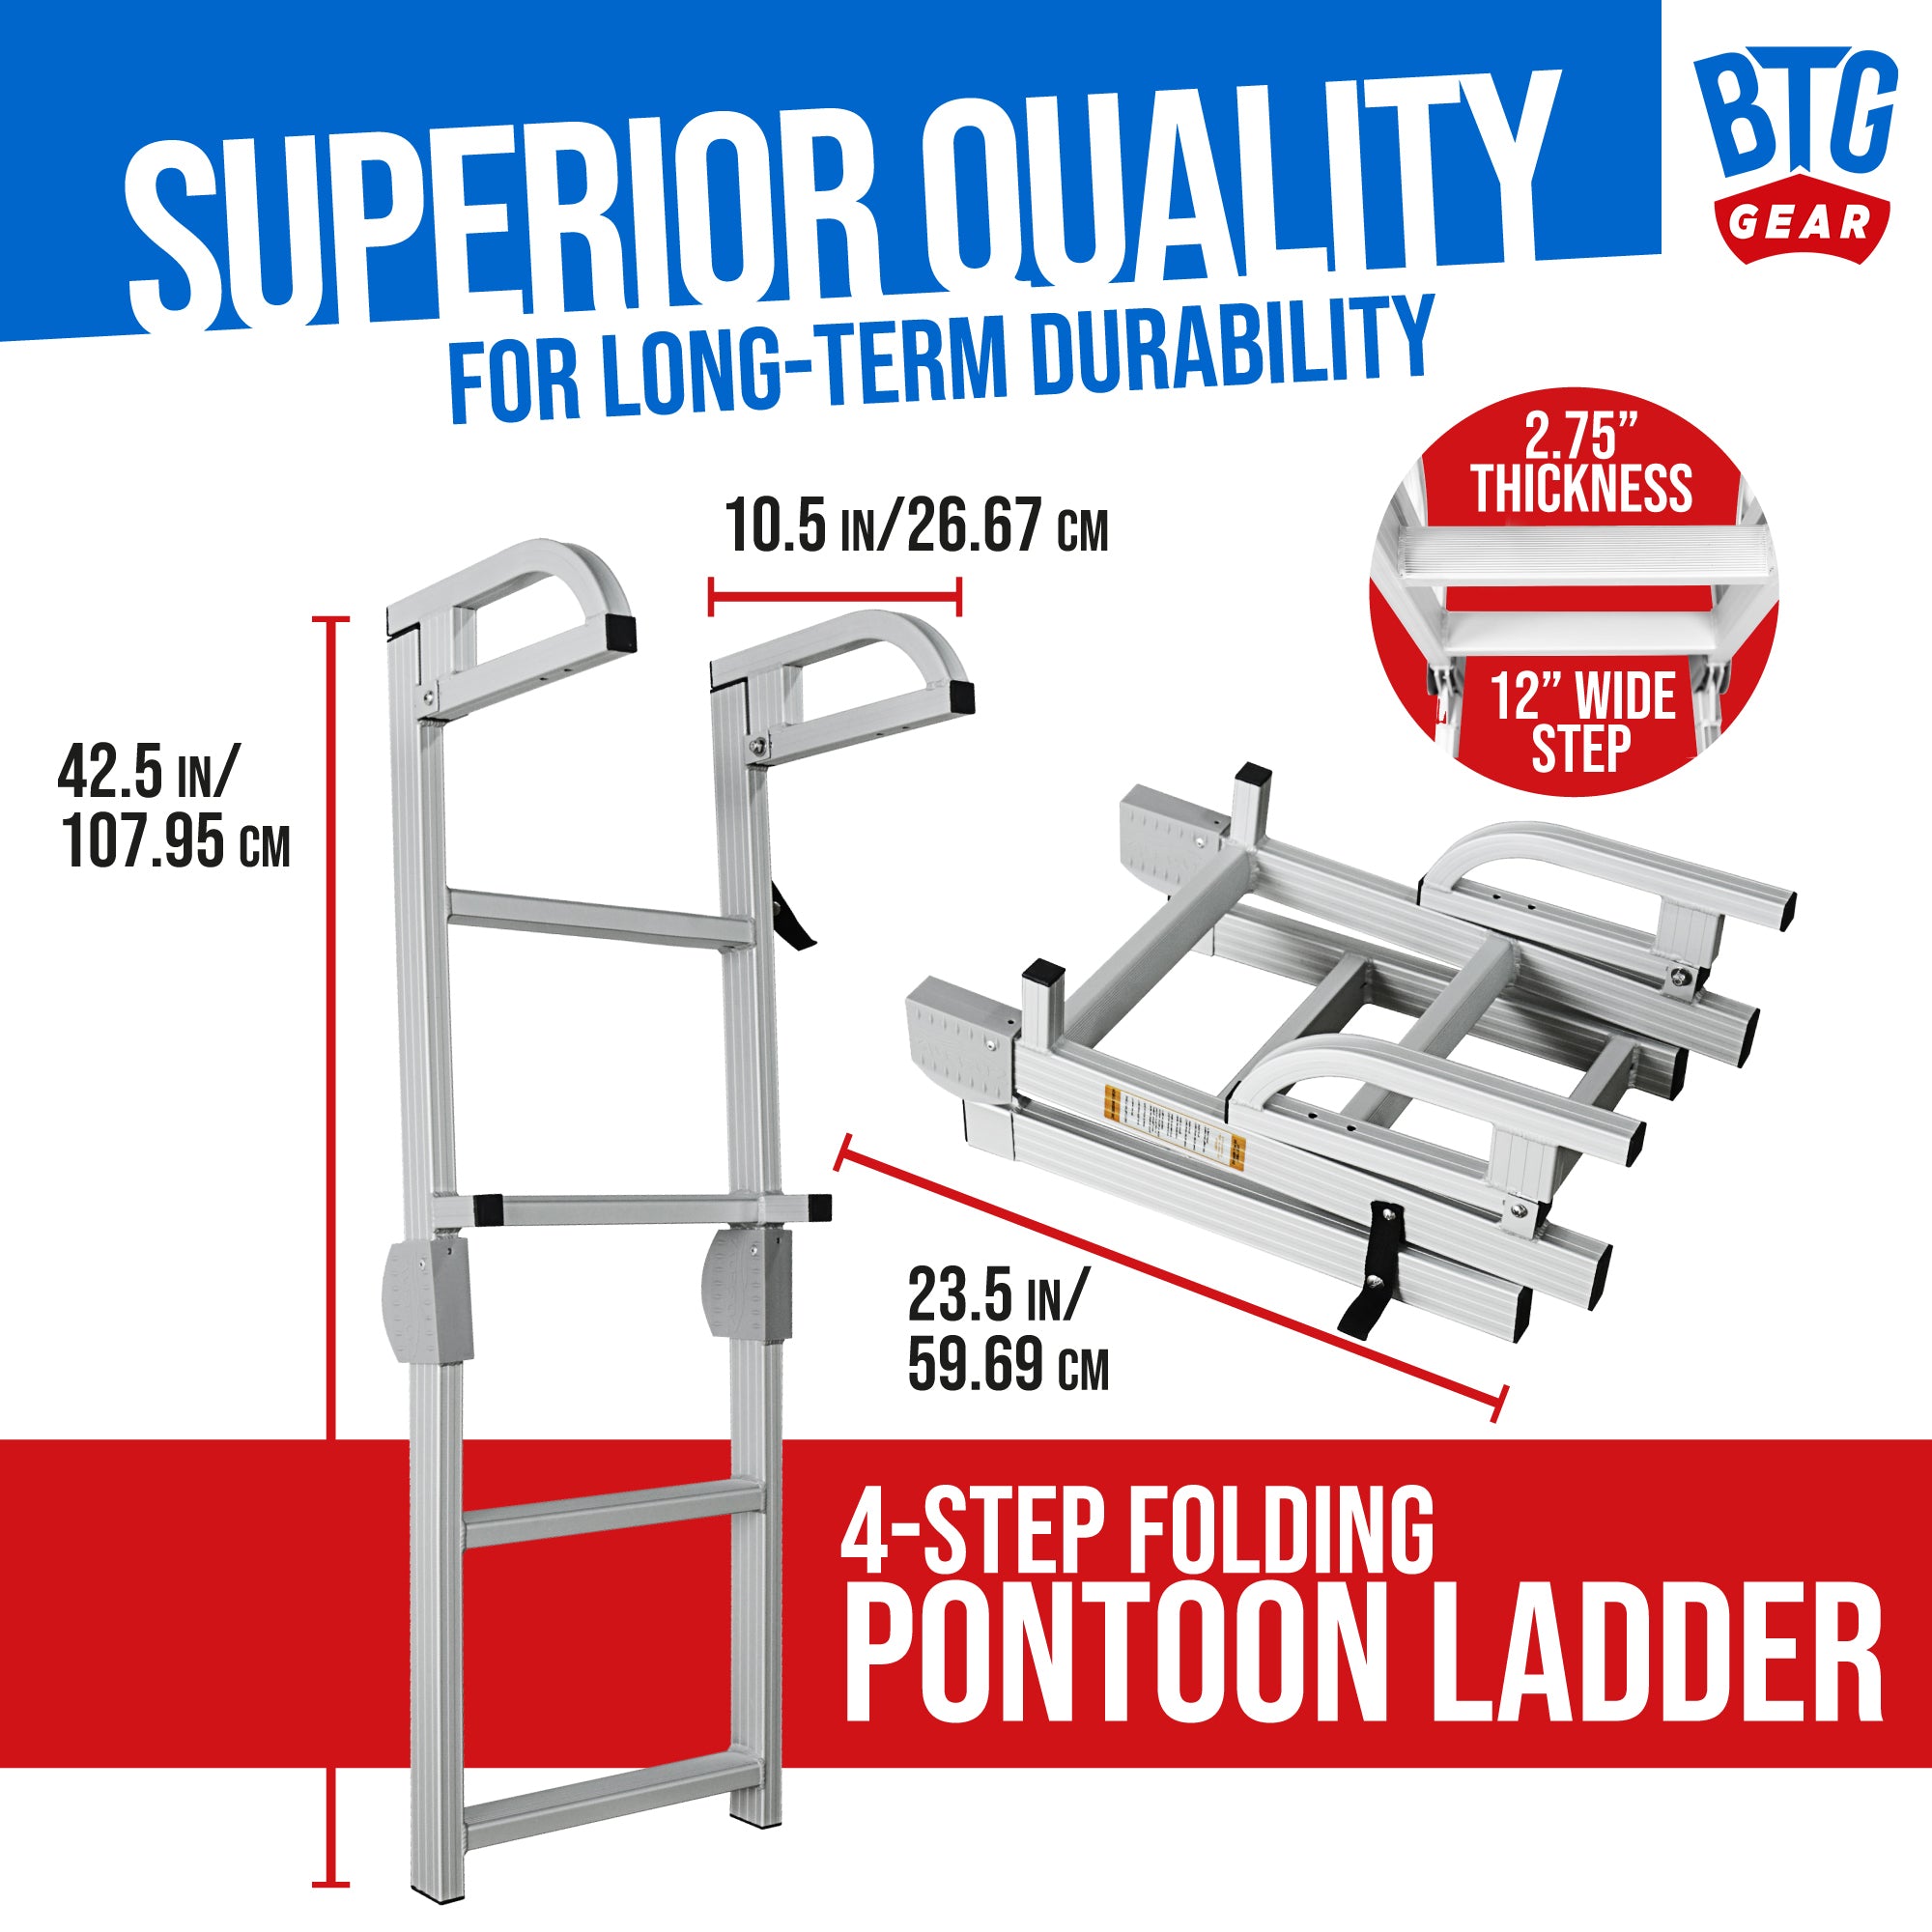 BTG Gear 4-Step Heavy-Duty Pontoon Boat Boarding Marine Folding Ladder, Aluminum w/ Quick Release Clips, extends up to 42